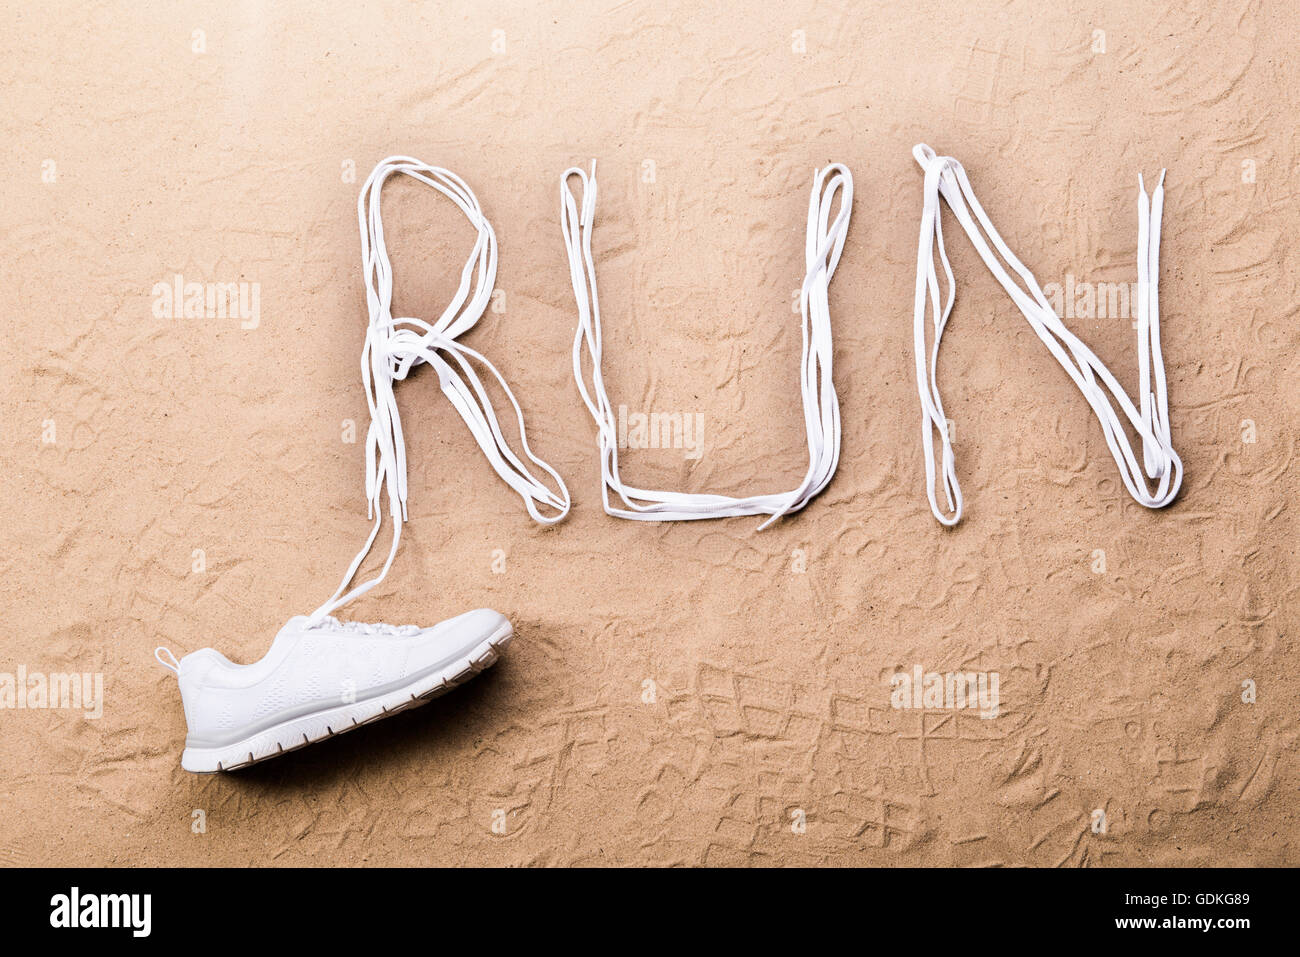 Running shoe and run sign made of shoelaces, sand Stock Photo